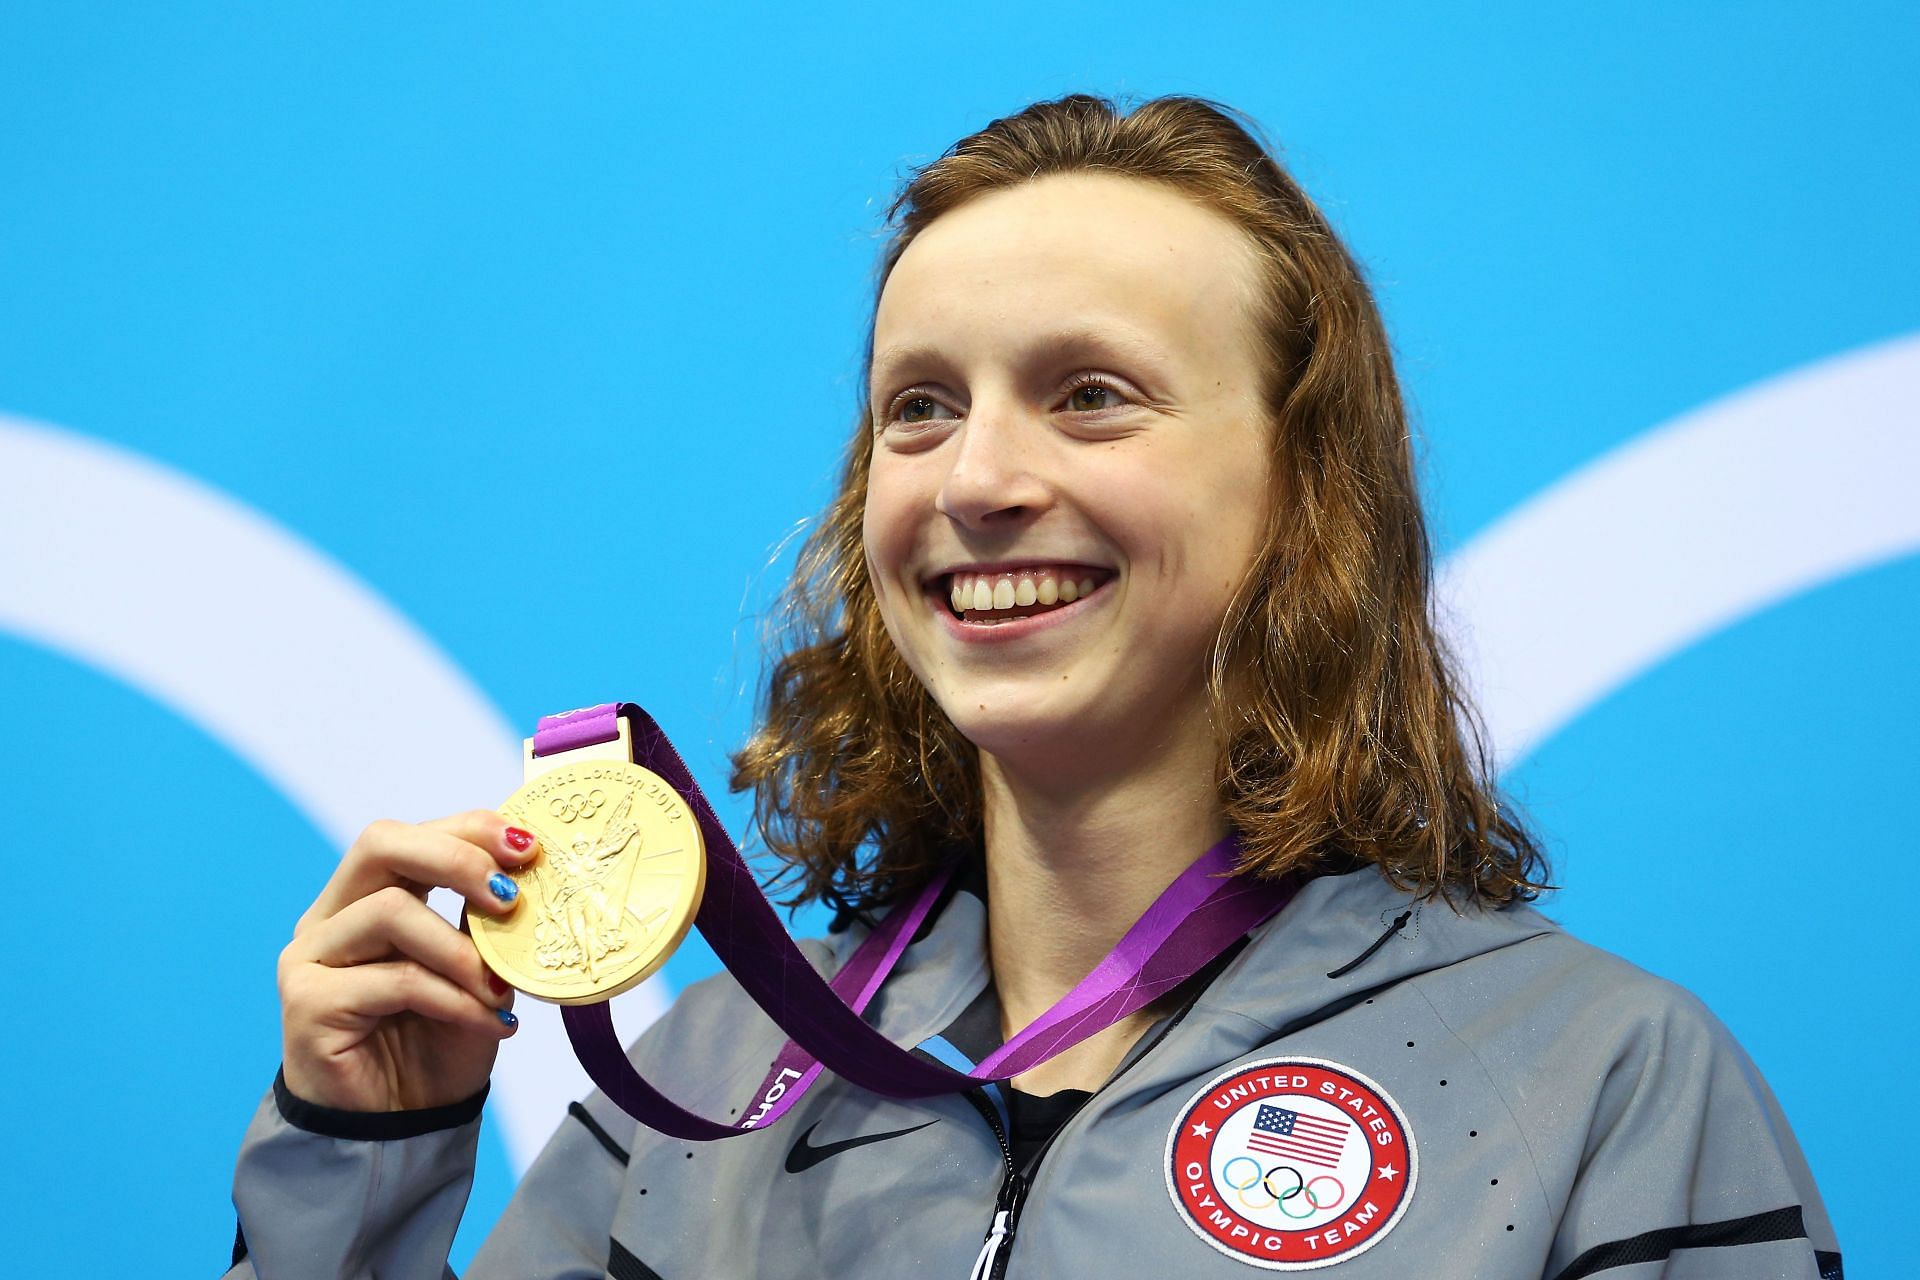 Katie Ledecky poses with her medal after winning the 800 meter freestyle during the 2012 London Olympics